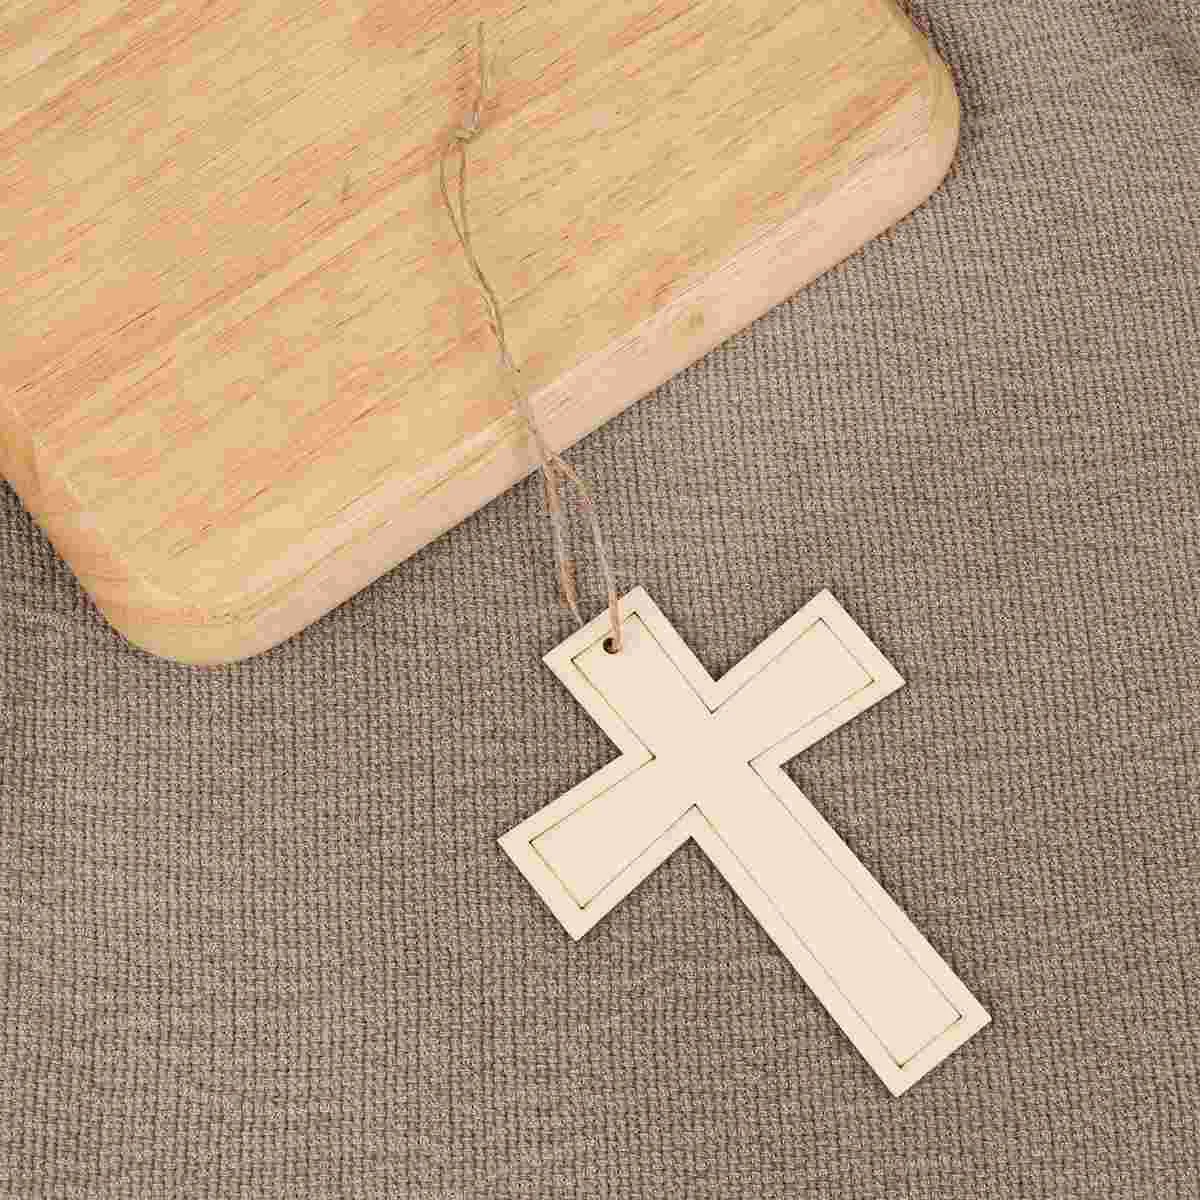 

Wooden Wall Hanging Wall Hanging Decor Crucifix Shape Pendant Wooden Hollow Crafts Ornament Crafts Woodsy Decor Wooden Crosses